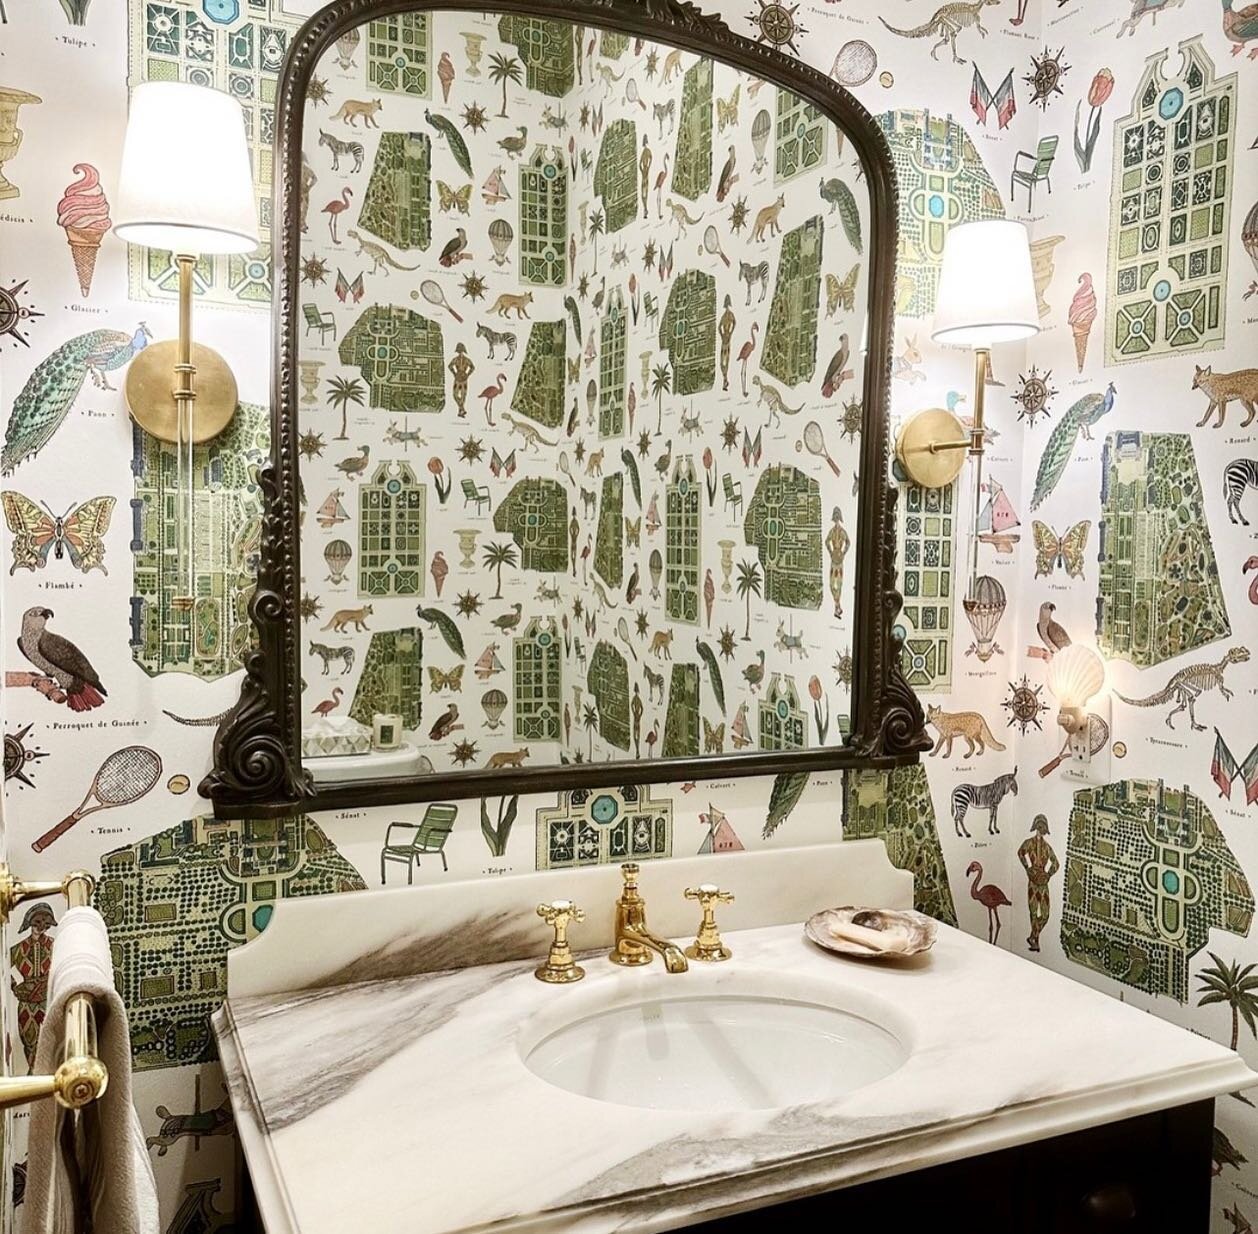 Just put the finishing touches on this powder room refresh in Arlington, featuring Pierre Frey&rsquo;s #iconic Jardins Parisiens wallpaper as well as some gorgeous @waterworks fixtures and sconces from @visualcomfort (while keeping the original mirro